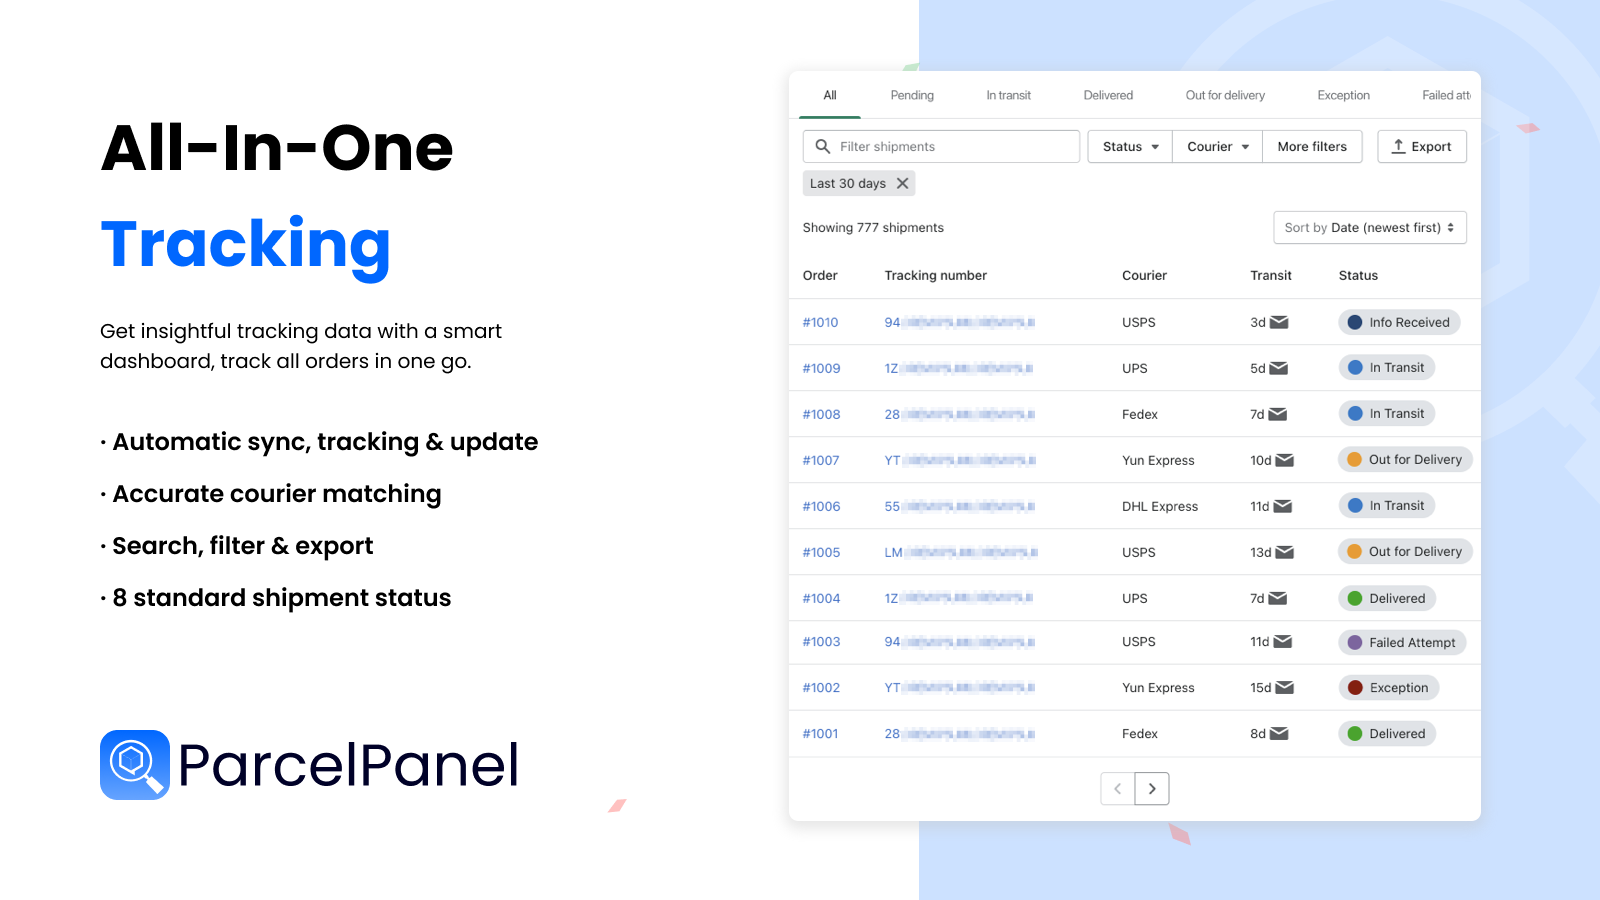 Get insightful tracking data, track all orders in one go